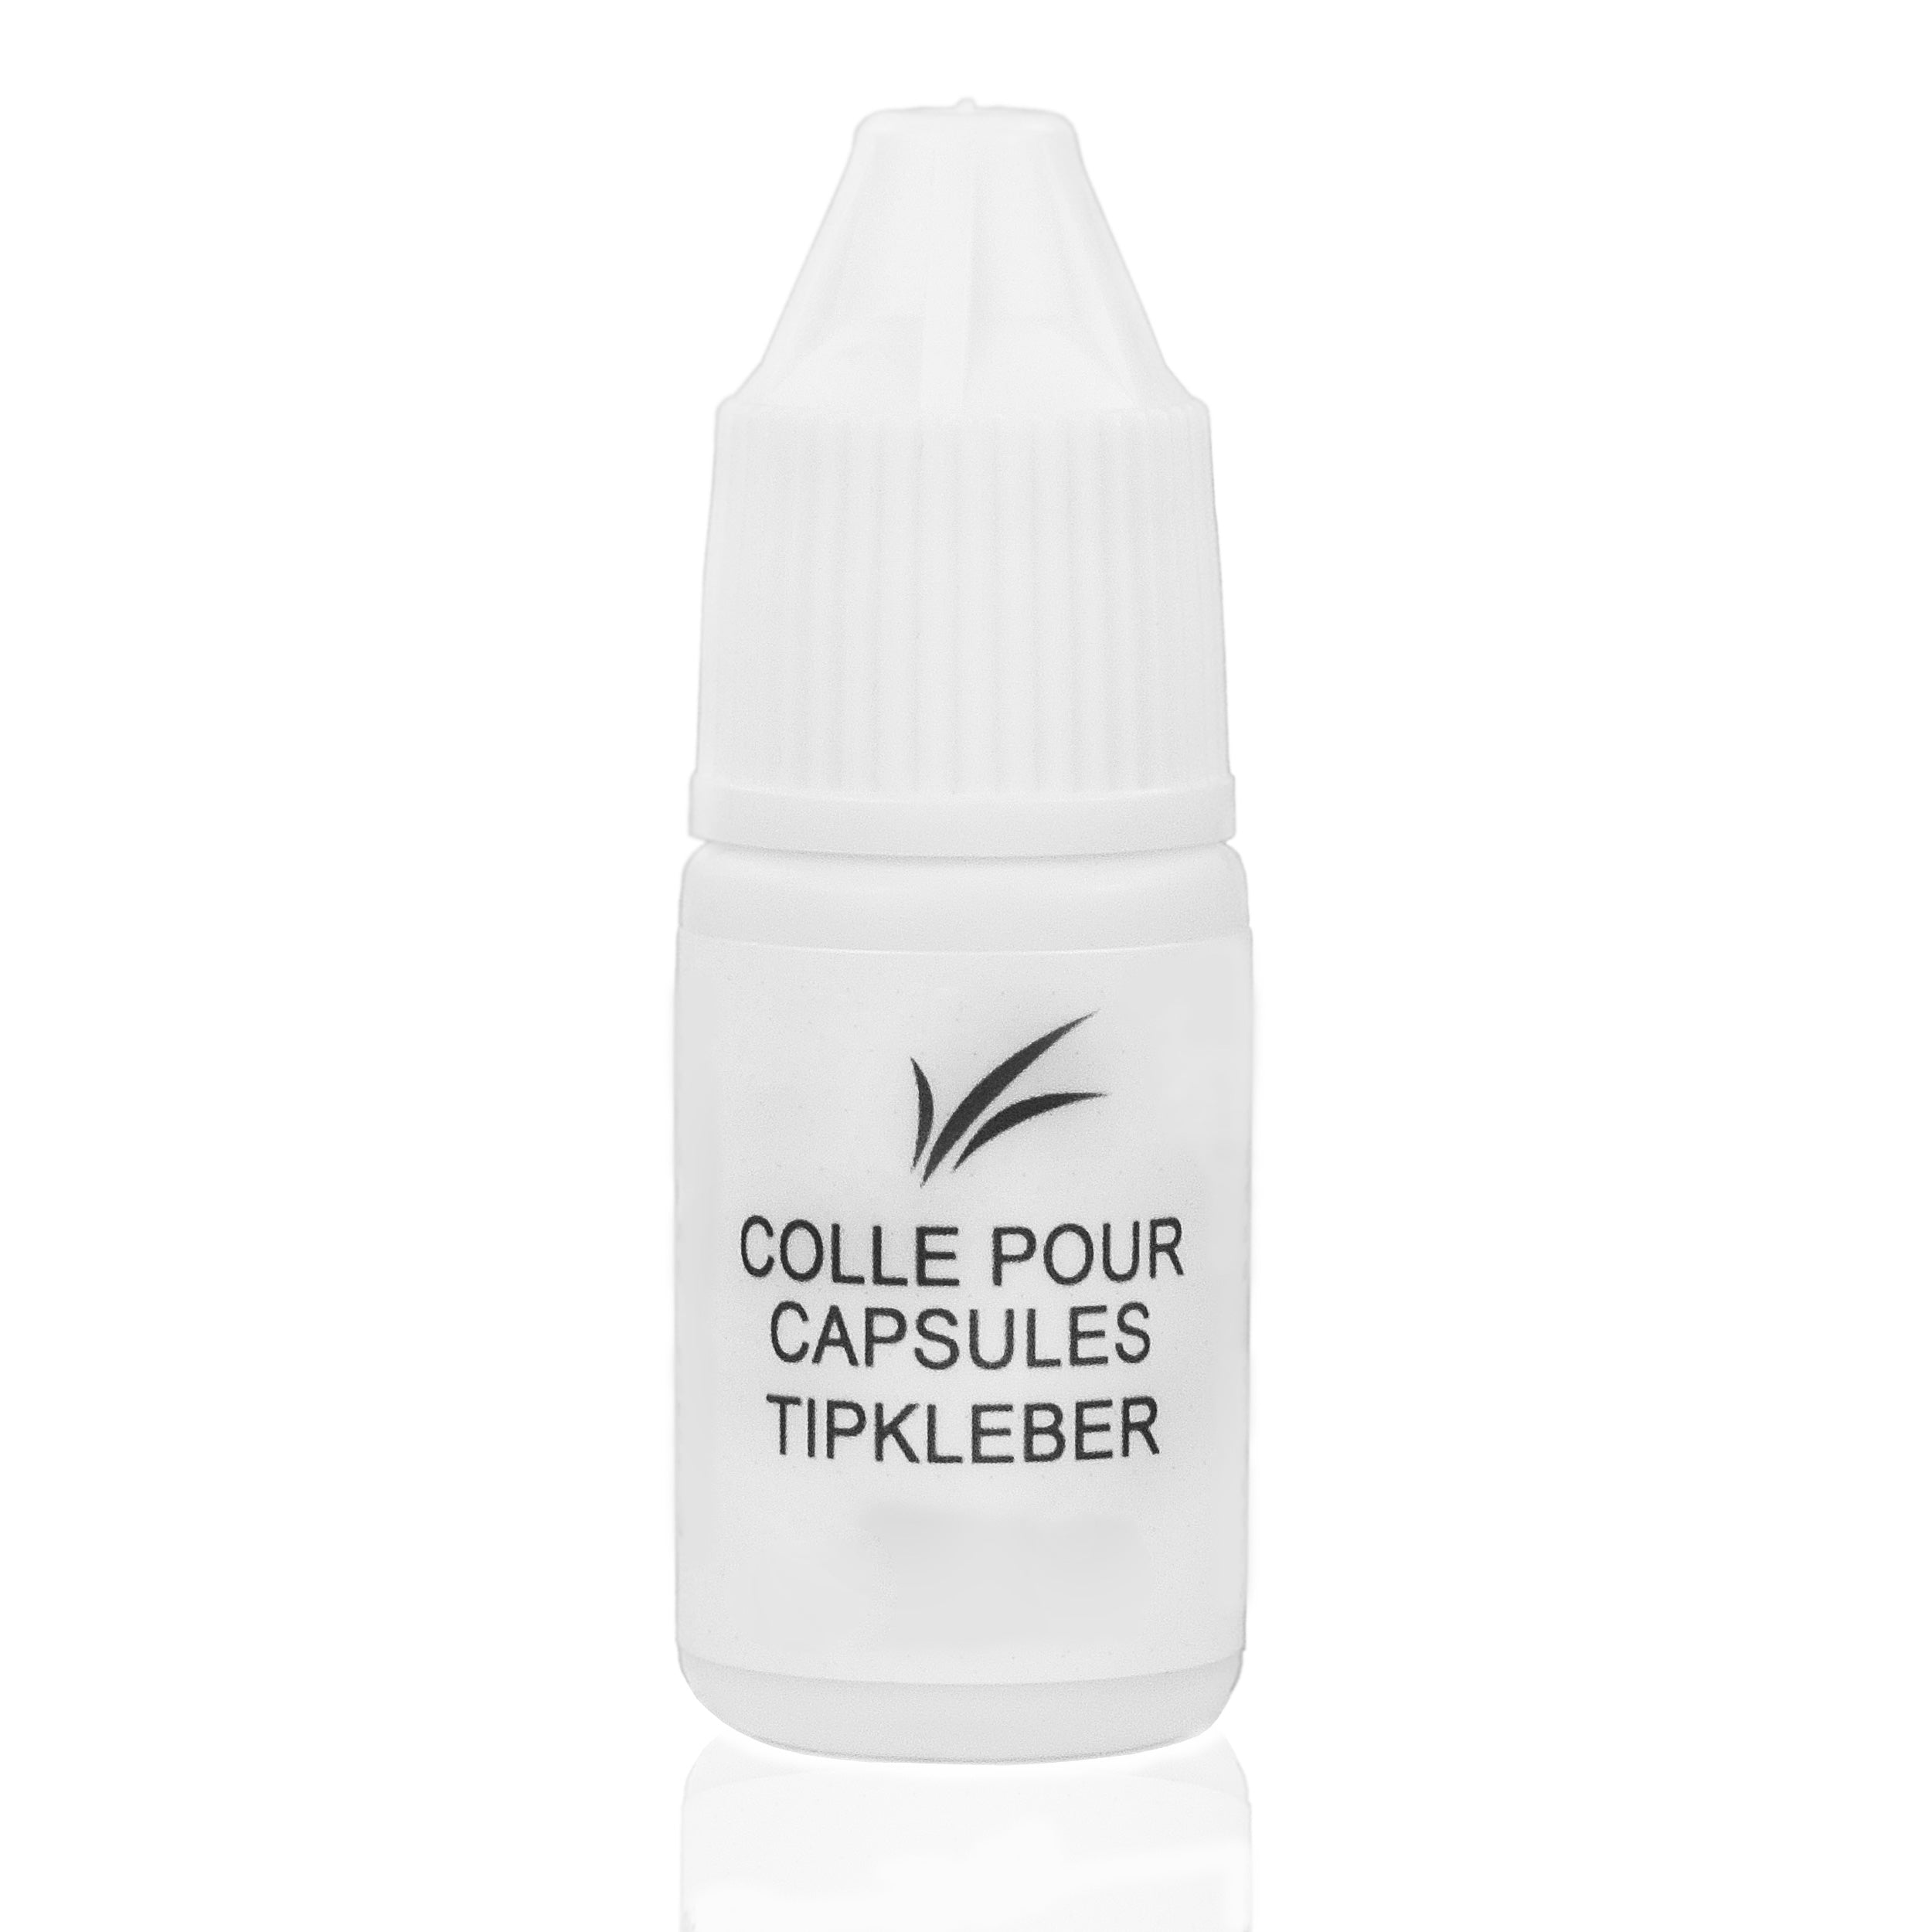 Colle pour capsules 3 g.